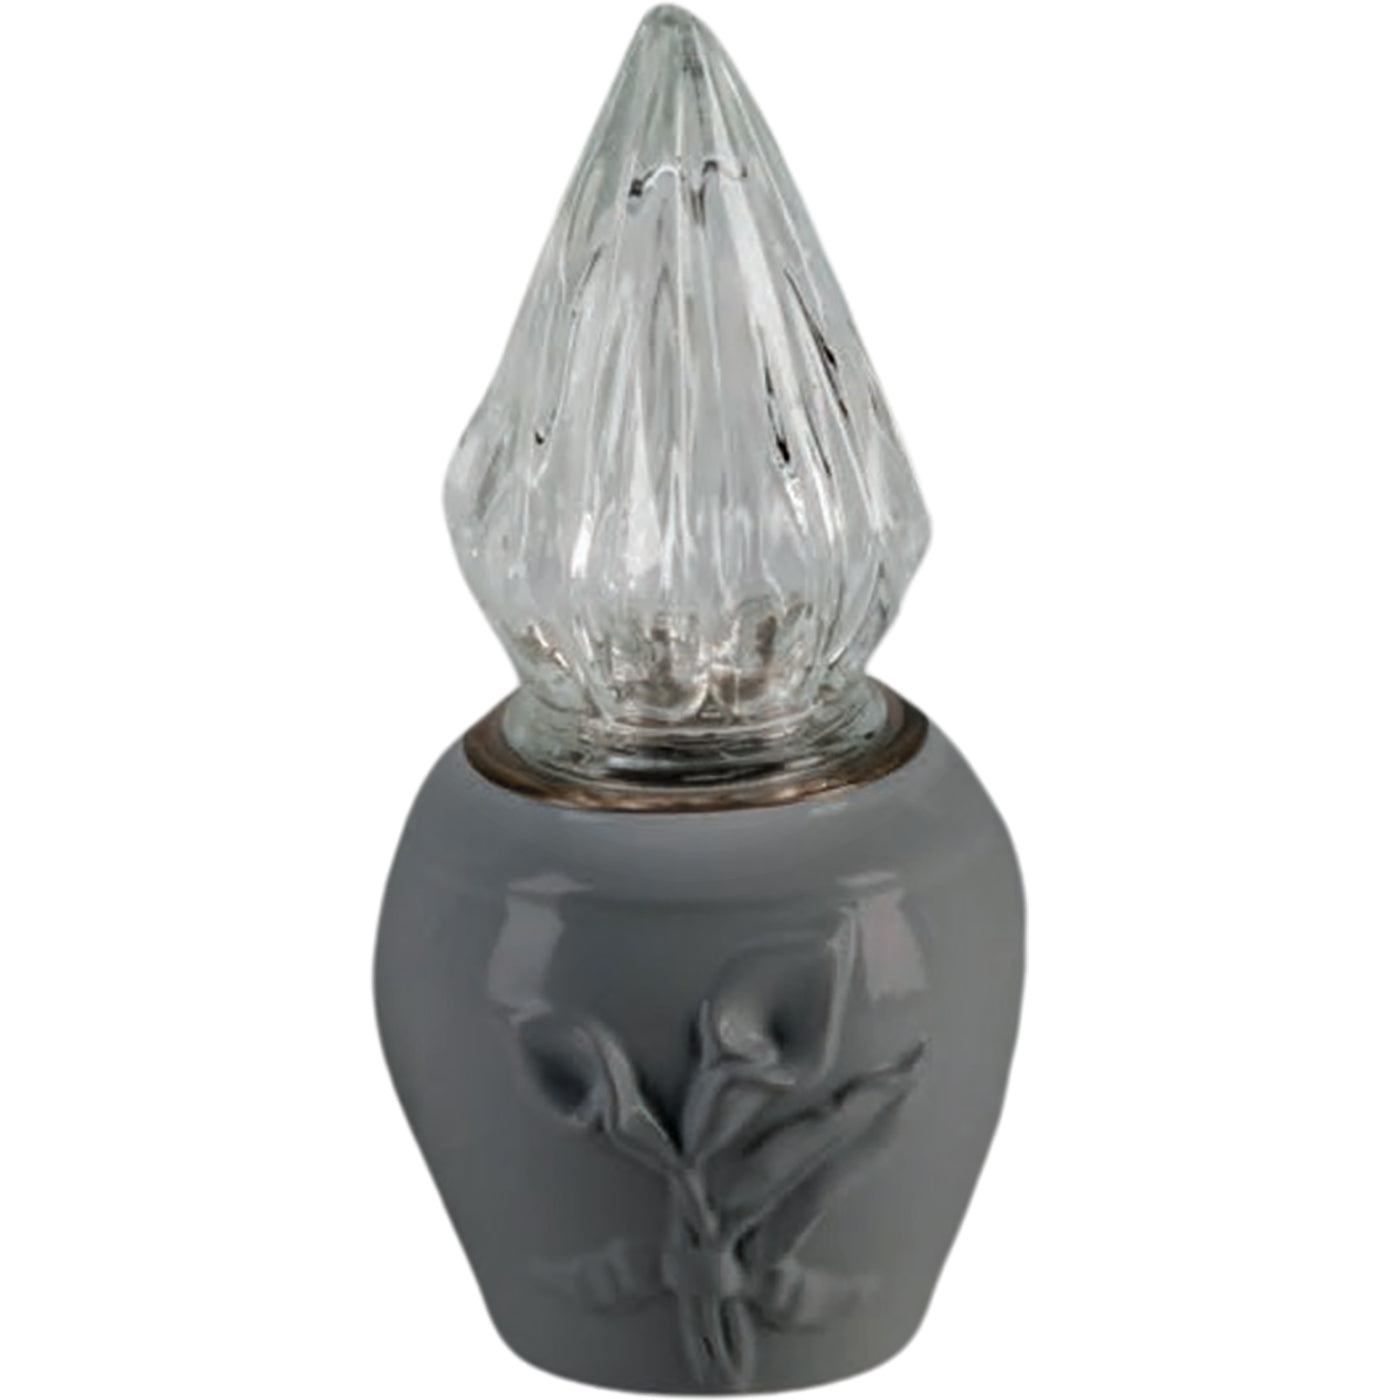 Grave light Calla gray 10x10cm - 3.9x3.9in In gray porcelain, wall attached CAL164P/G